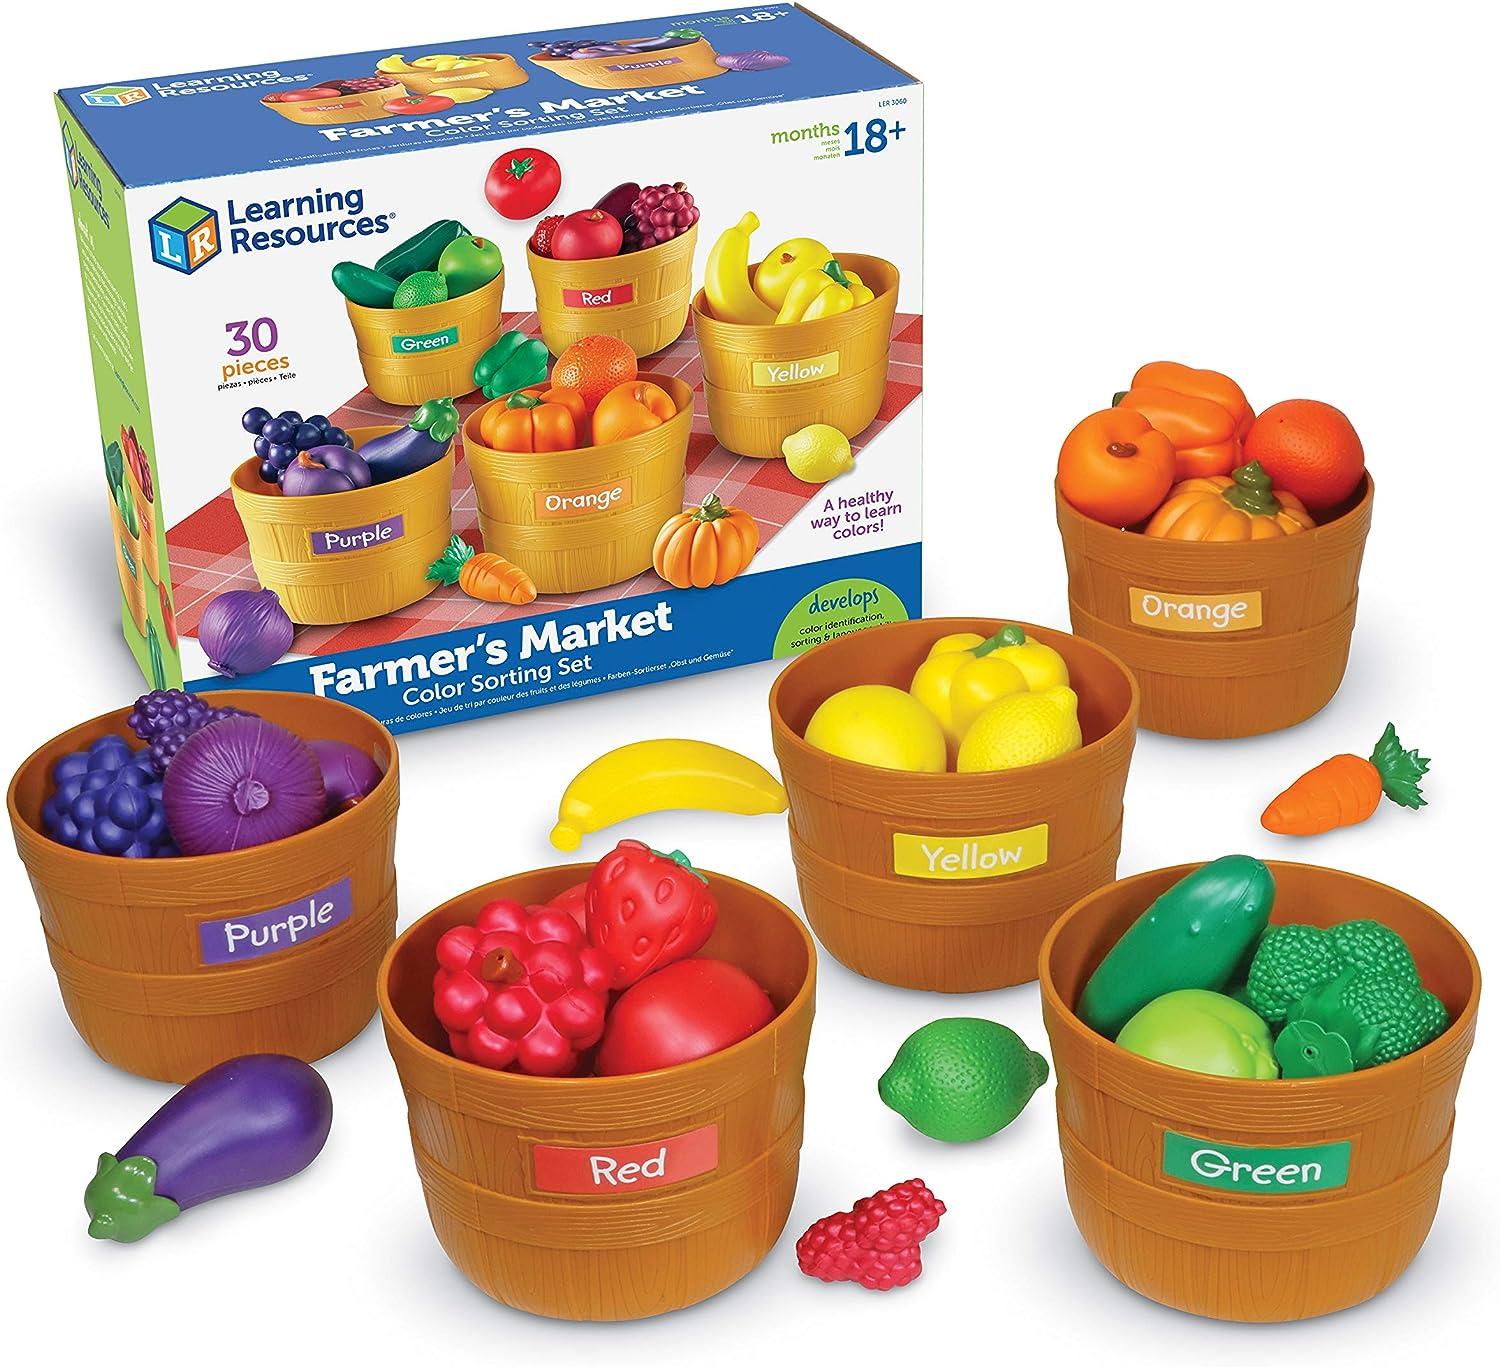 Learning Resources 3060 Farmers Market Color Sorting Set for $17.49